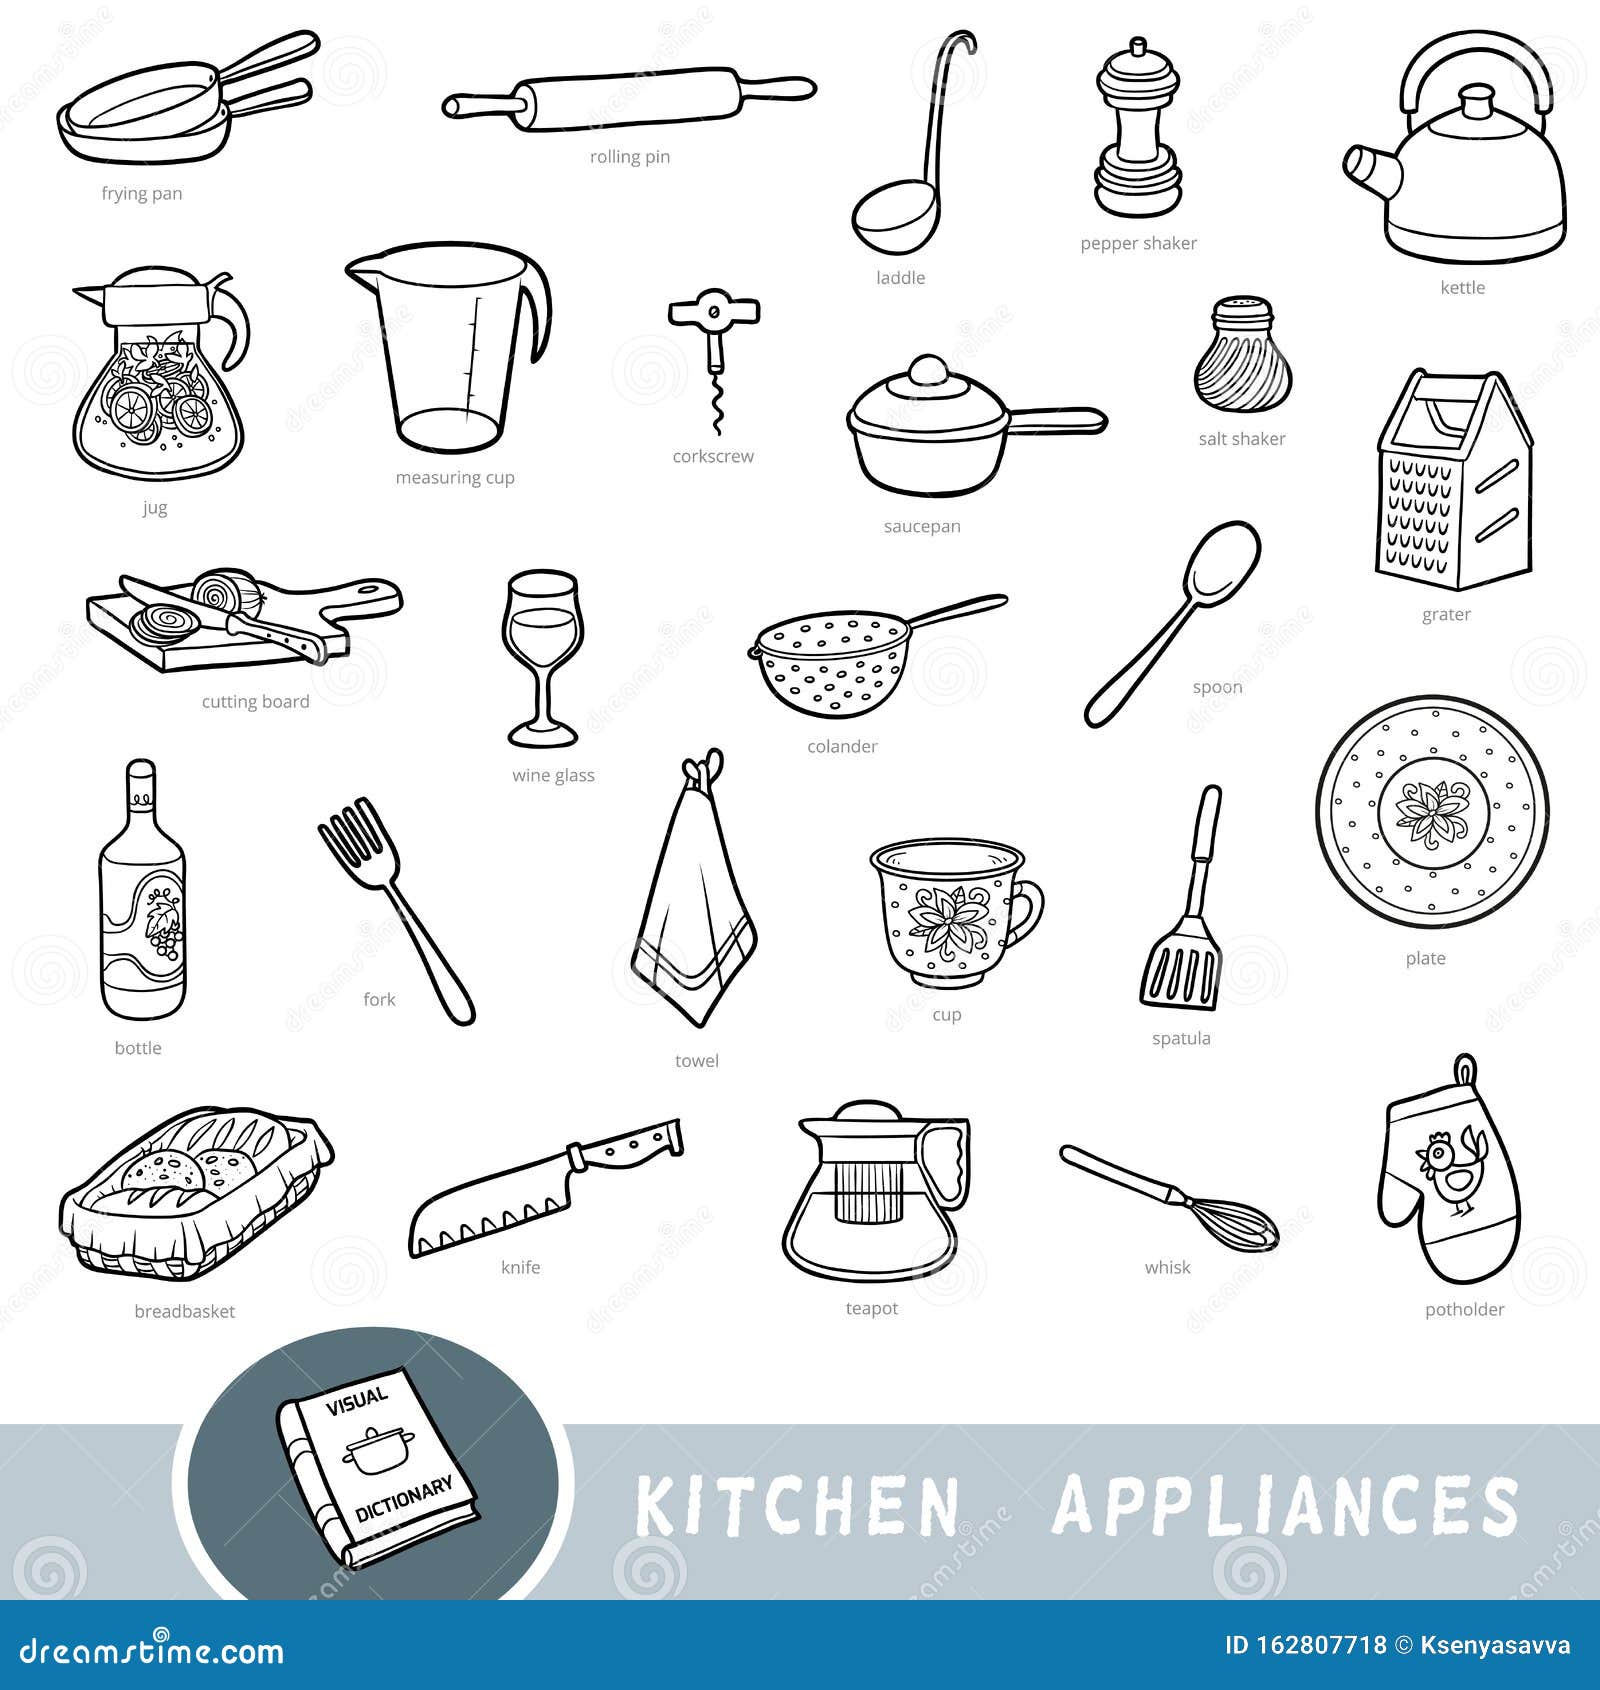 food and kitchen > kitchen > glassware image - Visual Dictionary